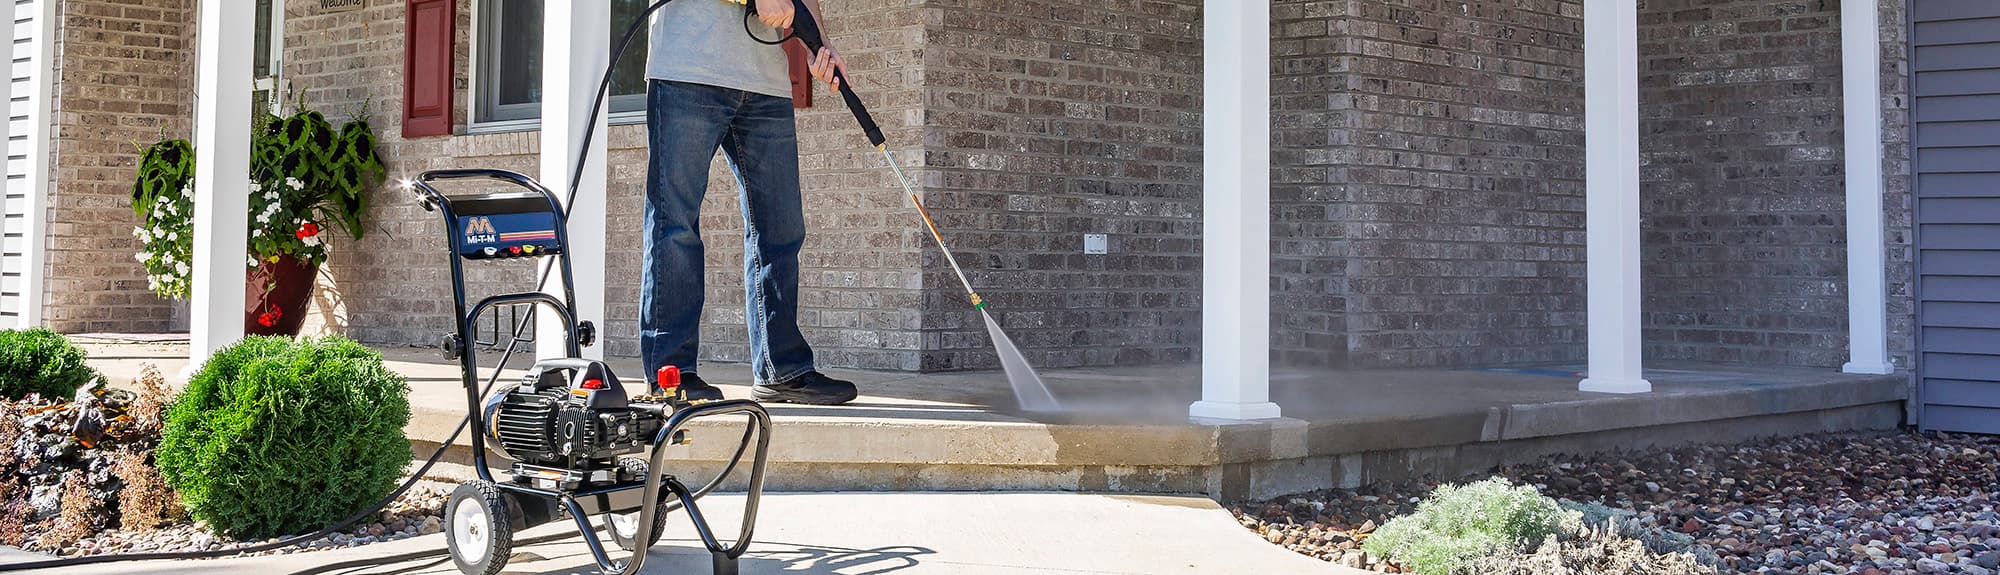 Residential Pressure Washers Banner Image